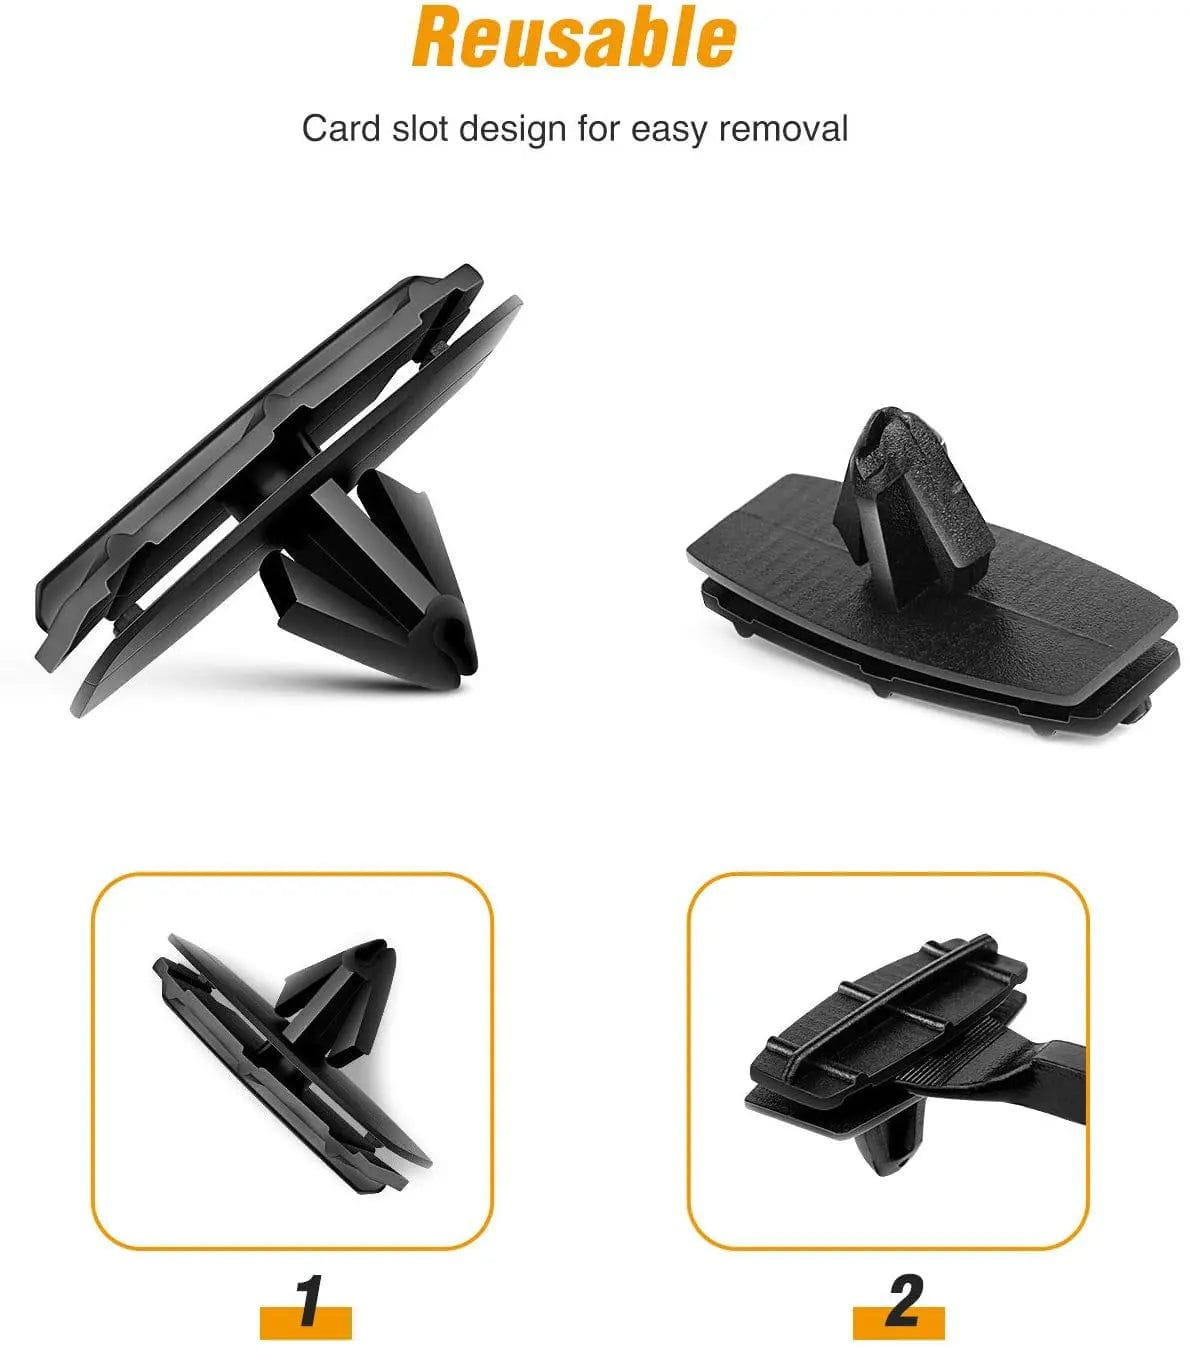 retainer clips 25 Pcs Head 37.6mm Hole 12.6mm Car Push Retainer Clips Kits For Jeep Chrysler Auveco